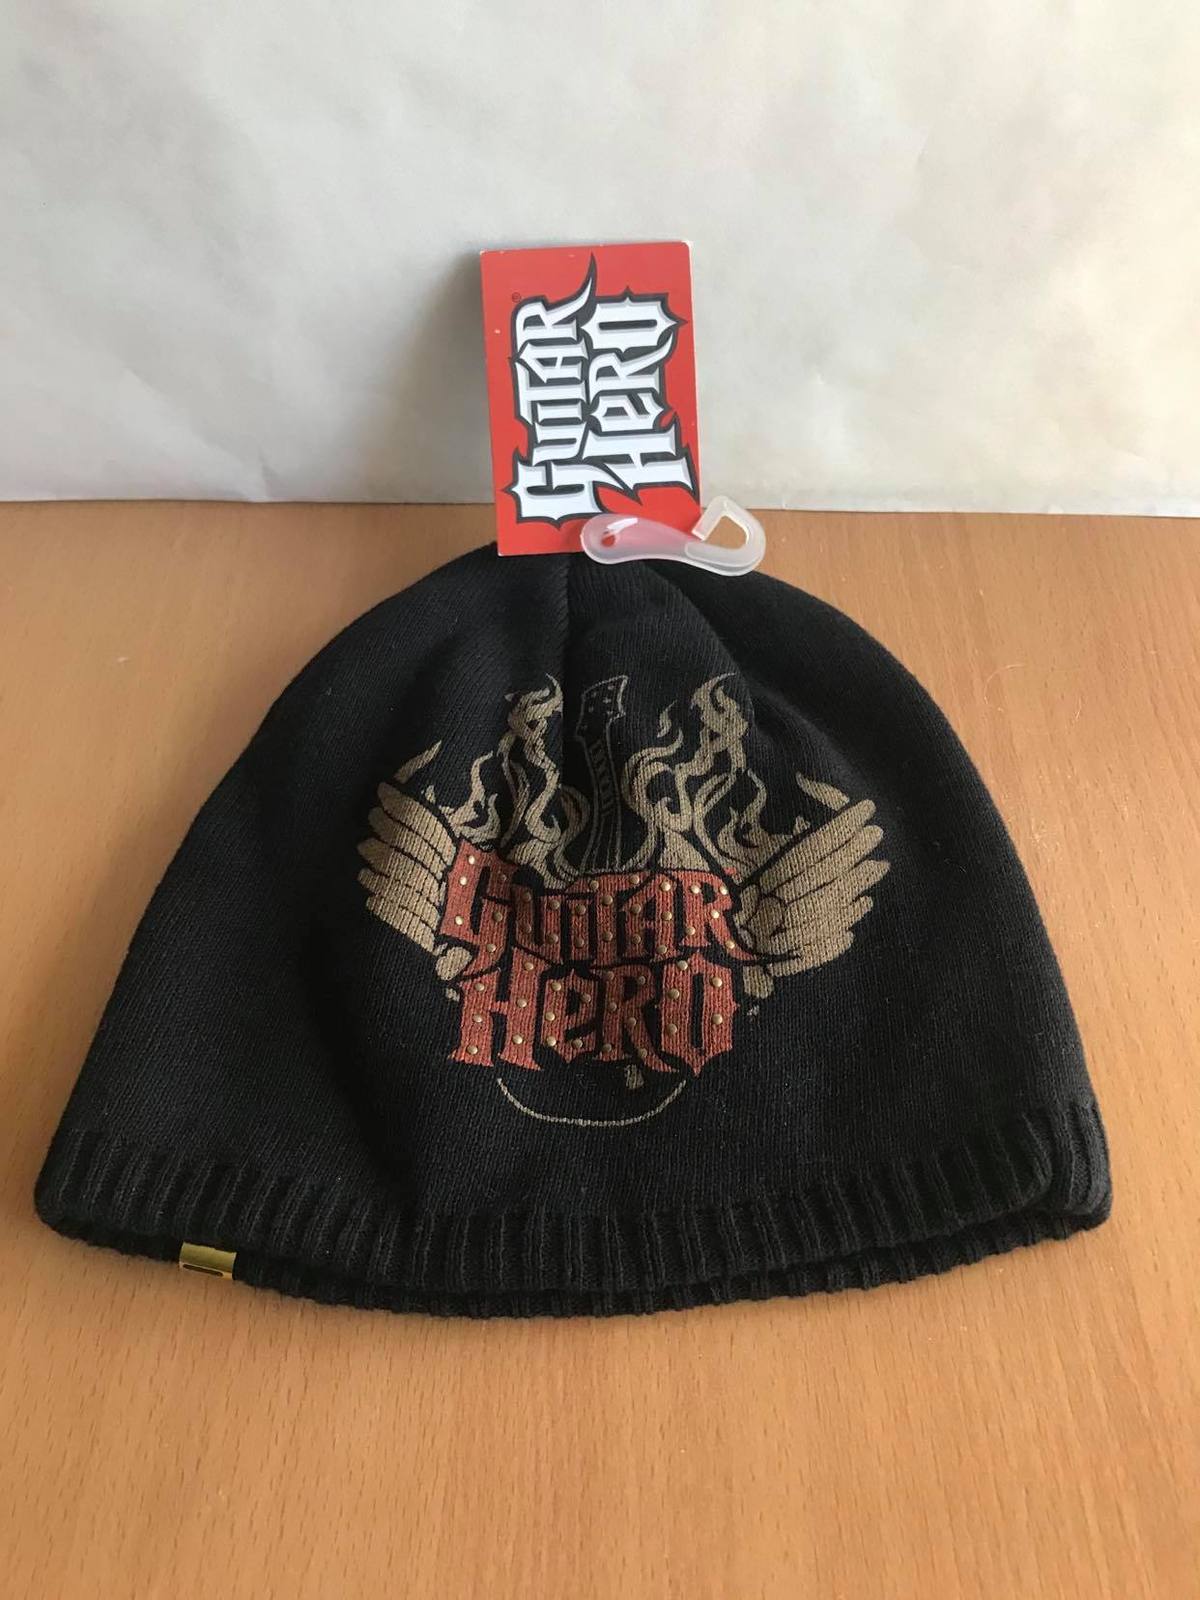 Authentic Guitar Hero Wings (Reversible) Winter Beanie *New with Tags* - $19.99